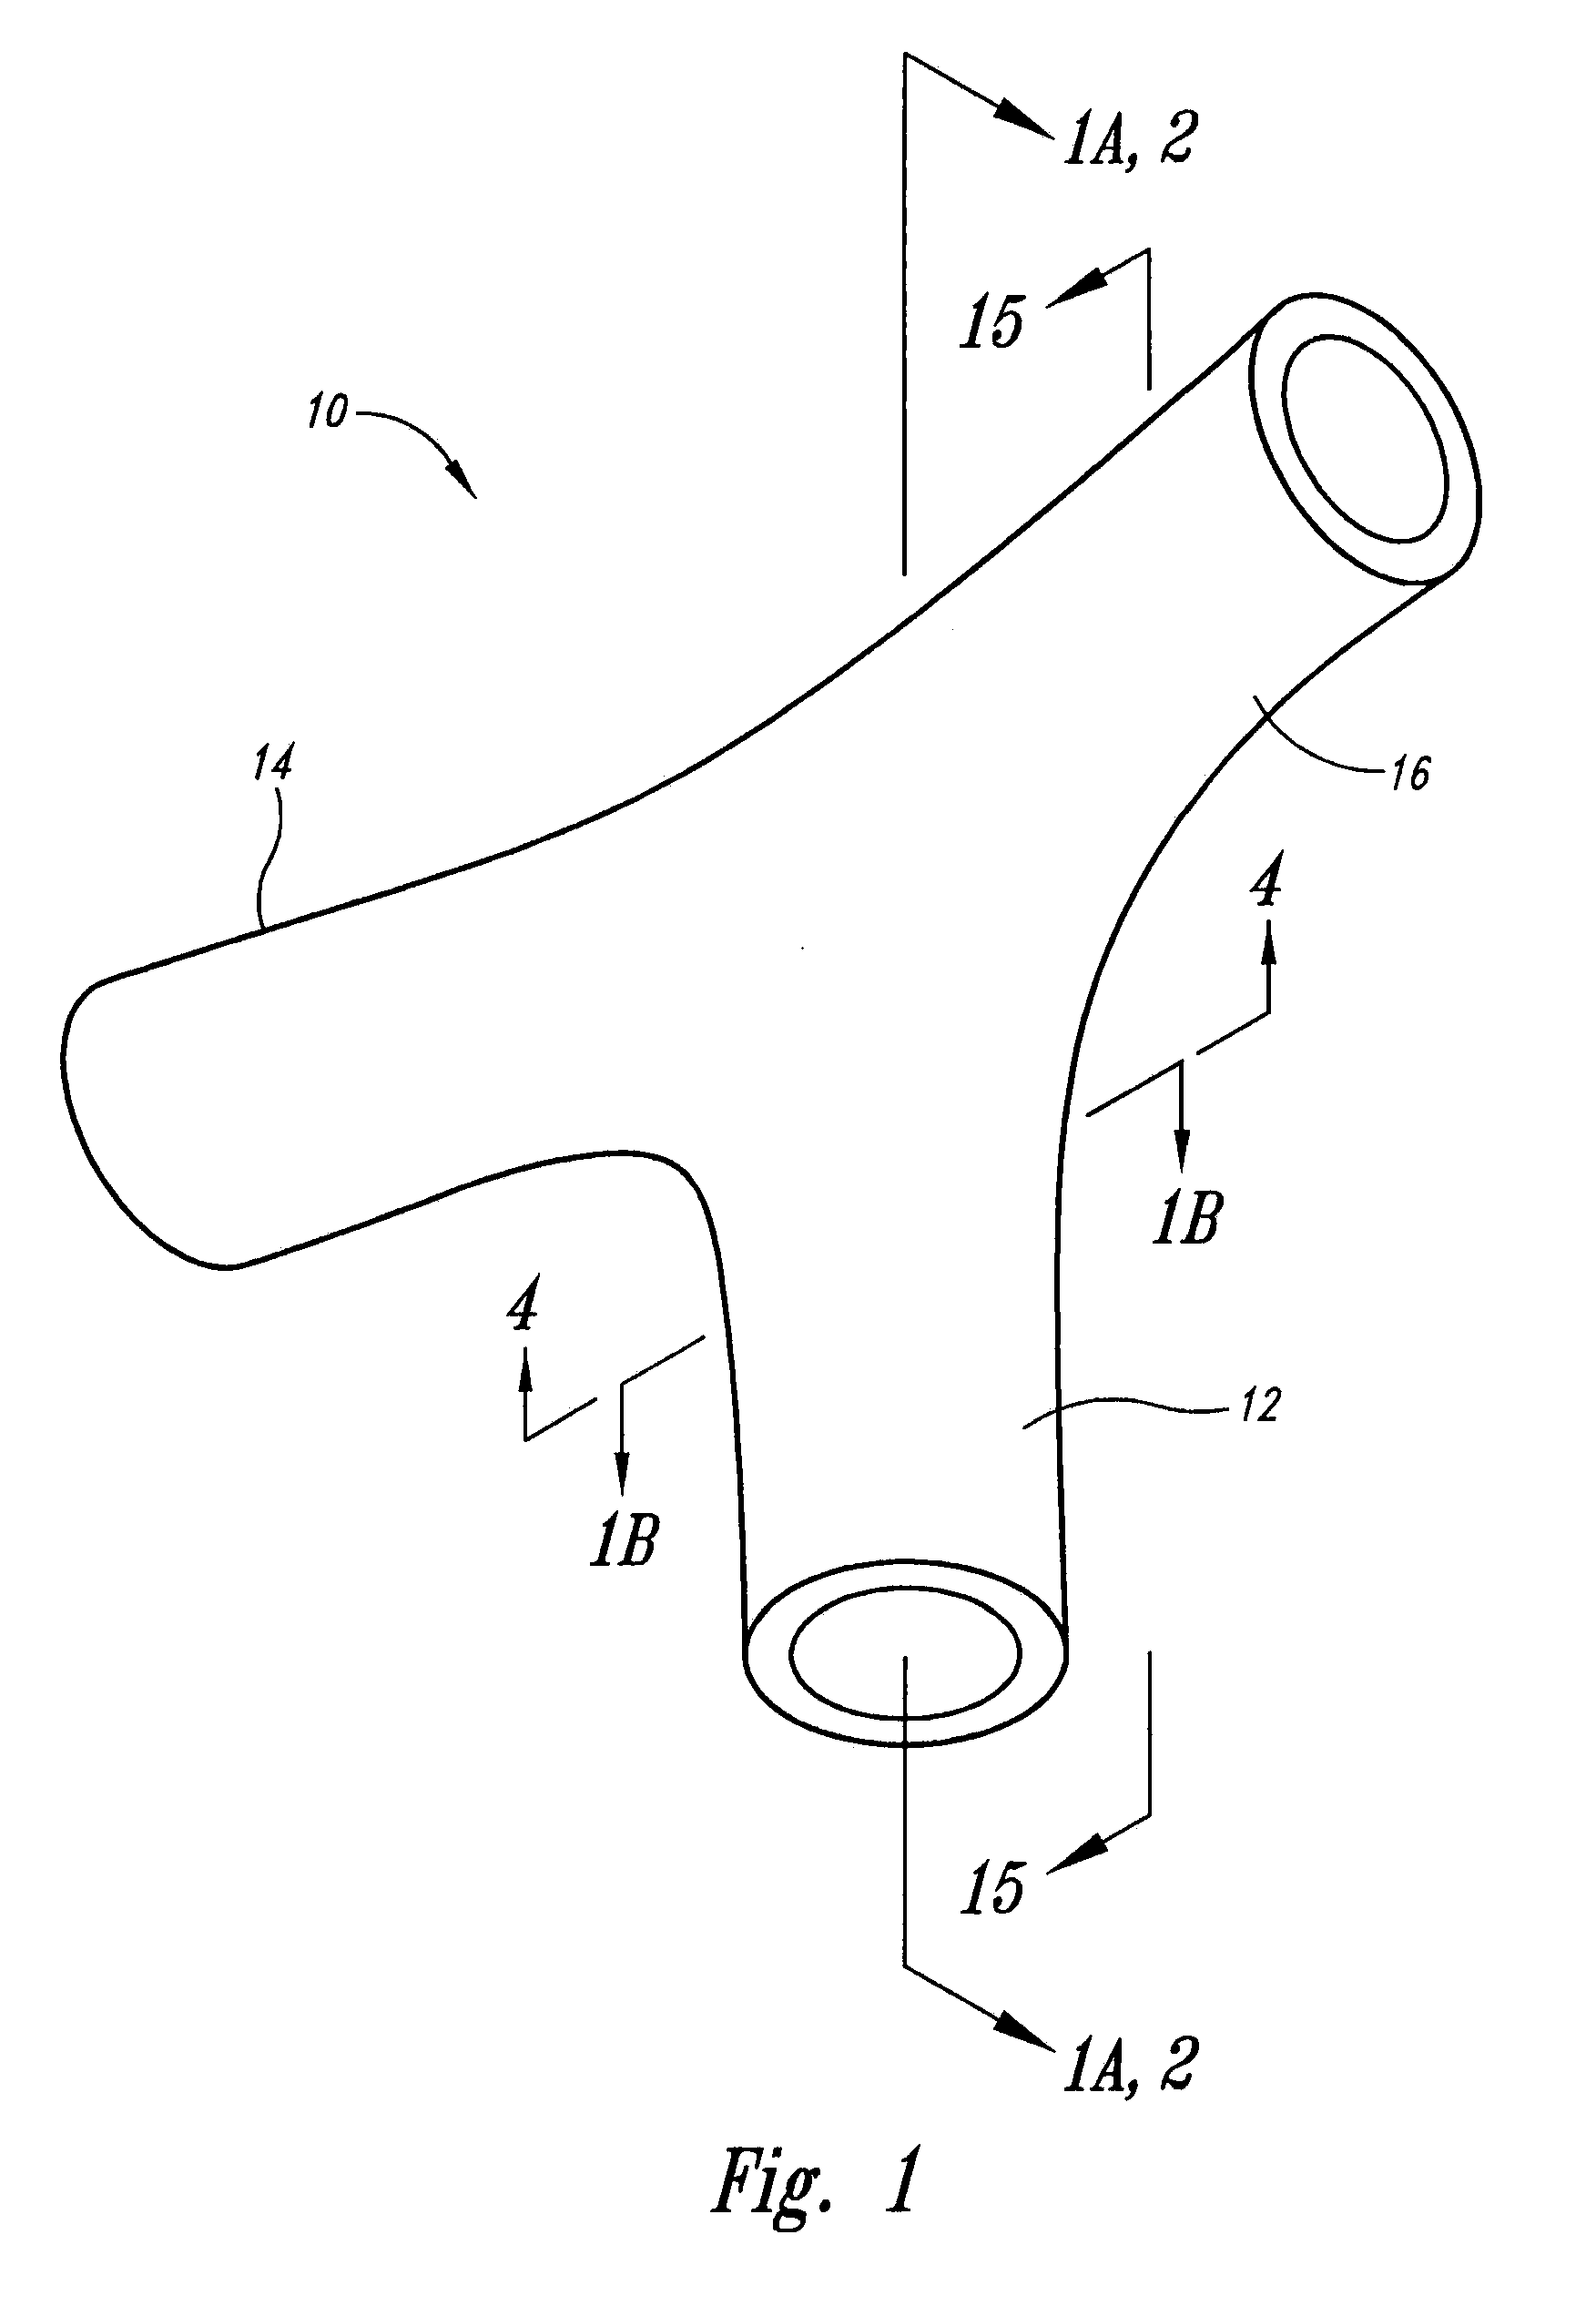 Vascular anchor tethering system and method